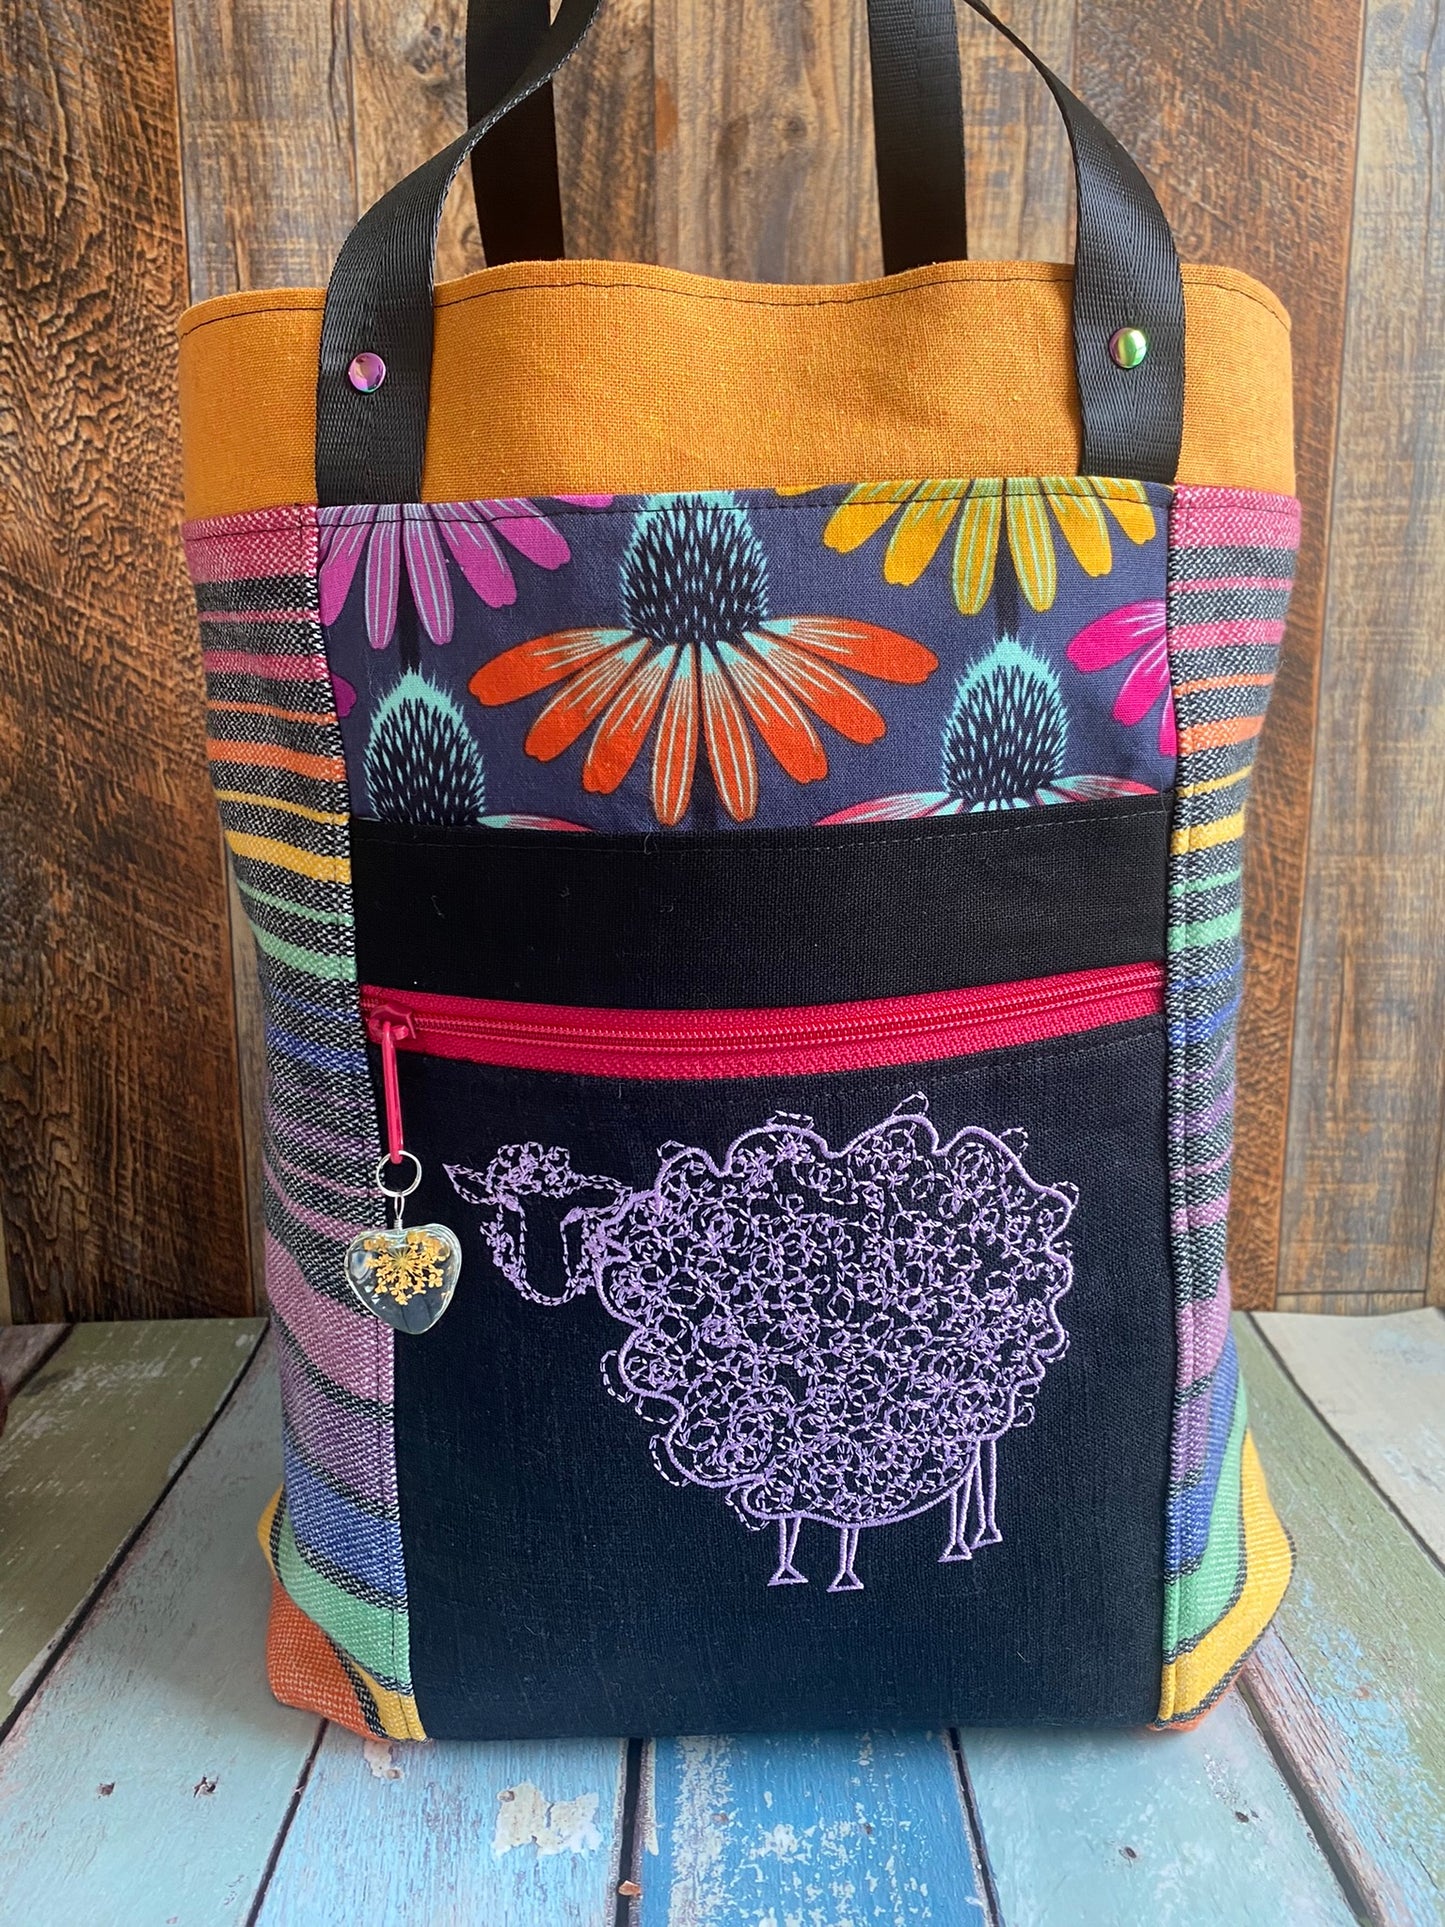 Curly Sheep and Coneflowers Large Firefly Project Bag